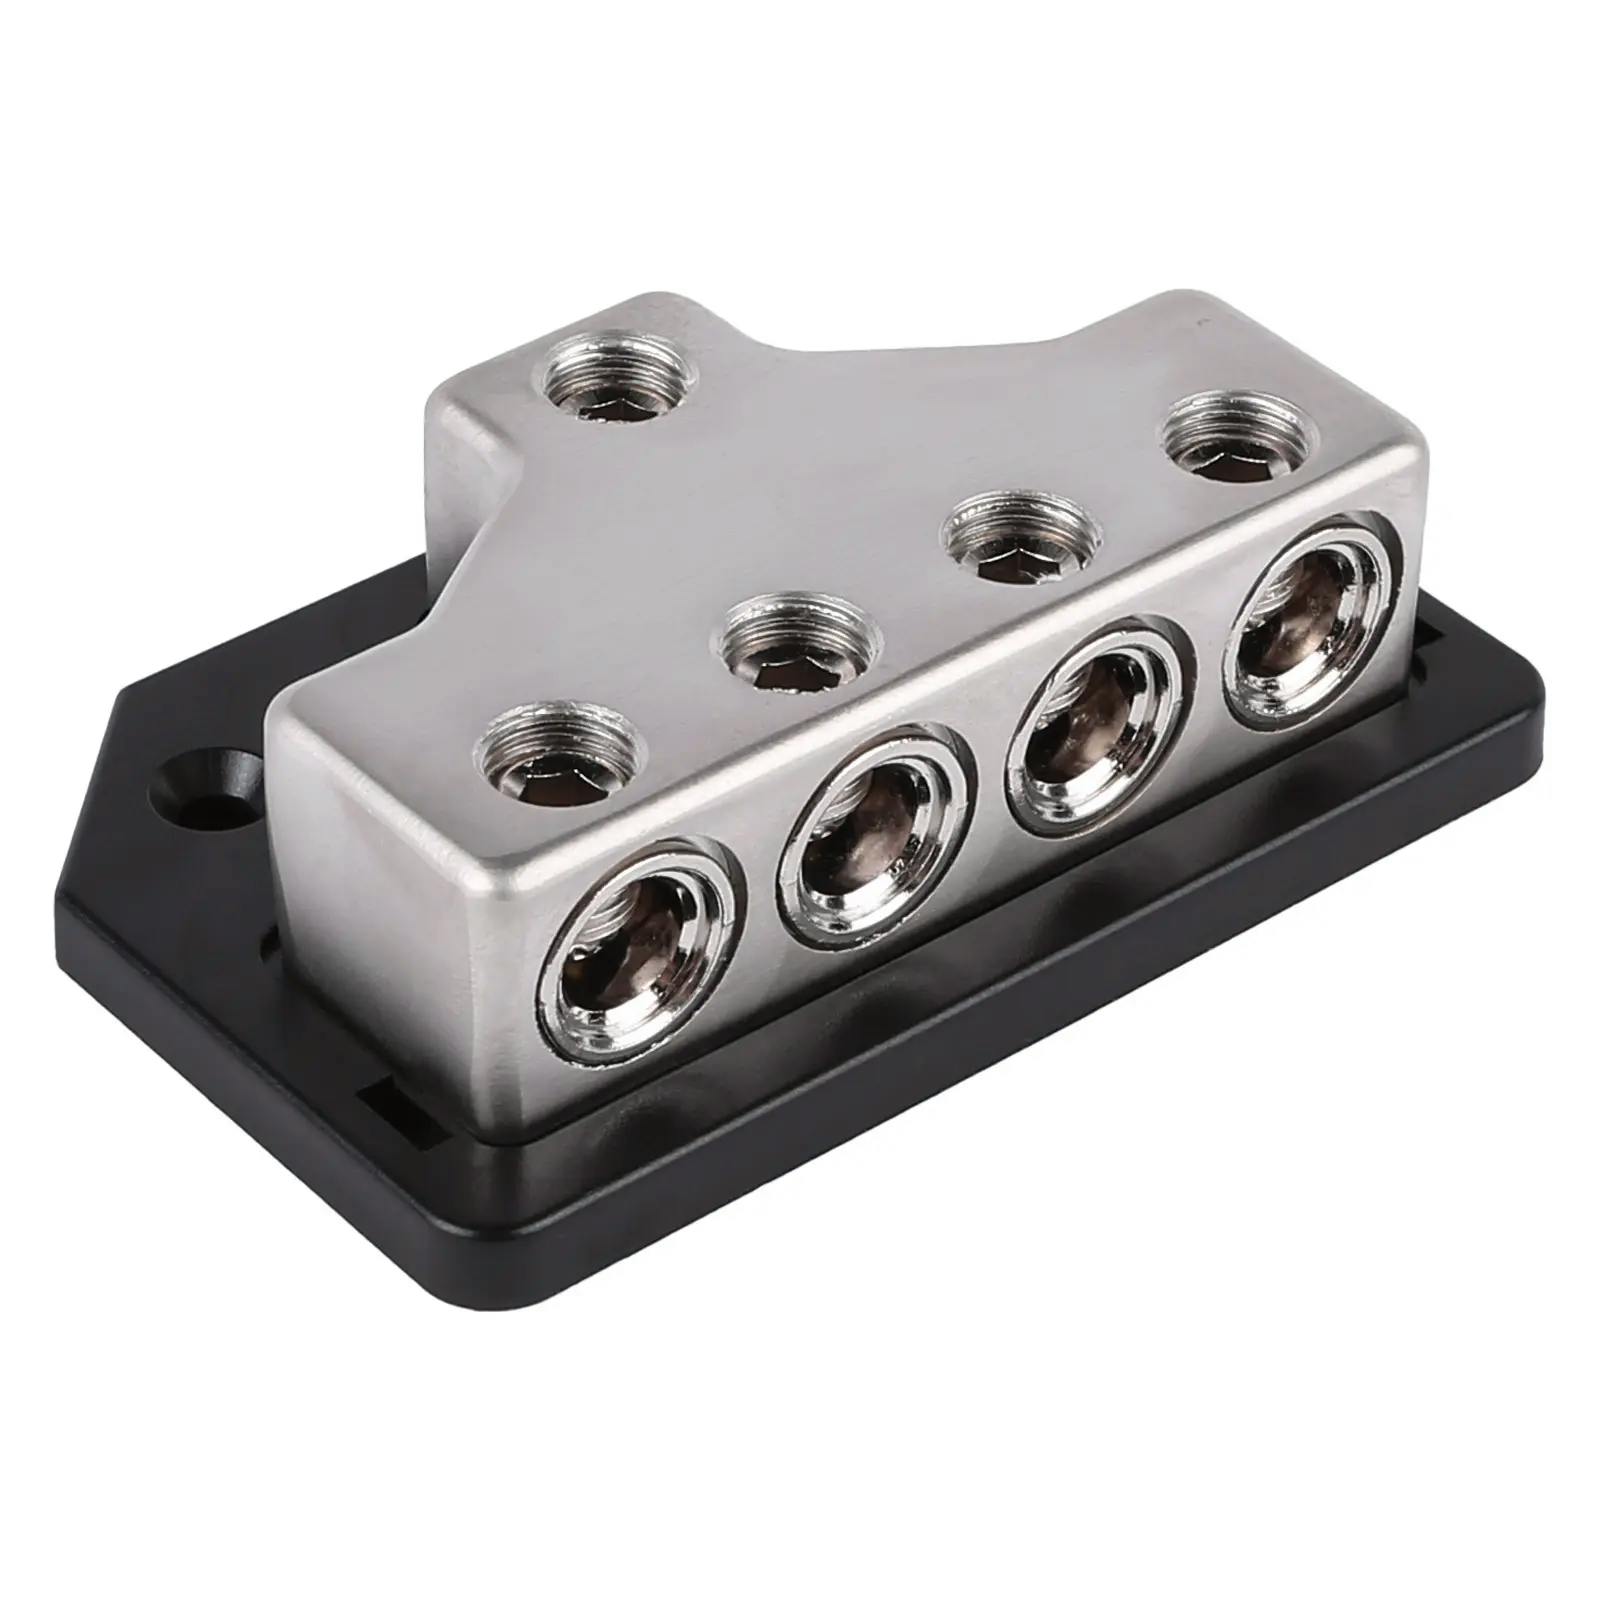 Featured Product Photo for SK-DIST-BLK7 | Single 0/4 Gauge to Quad 0/4 Gauge Power Distribution Block